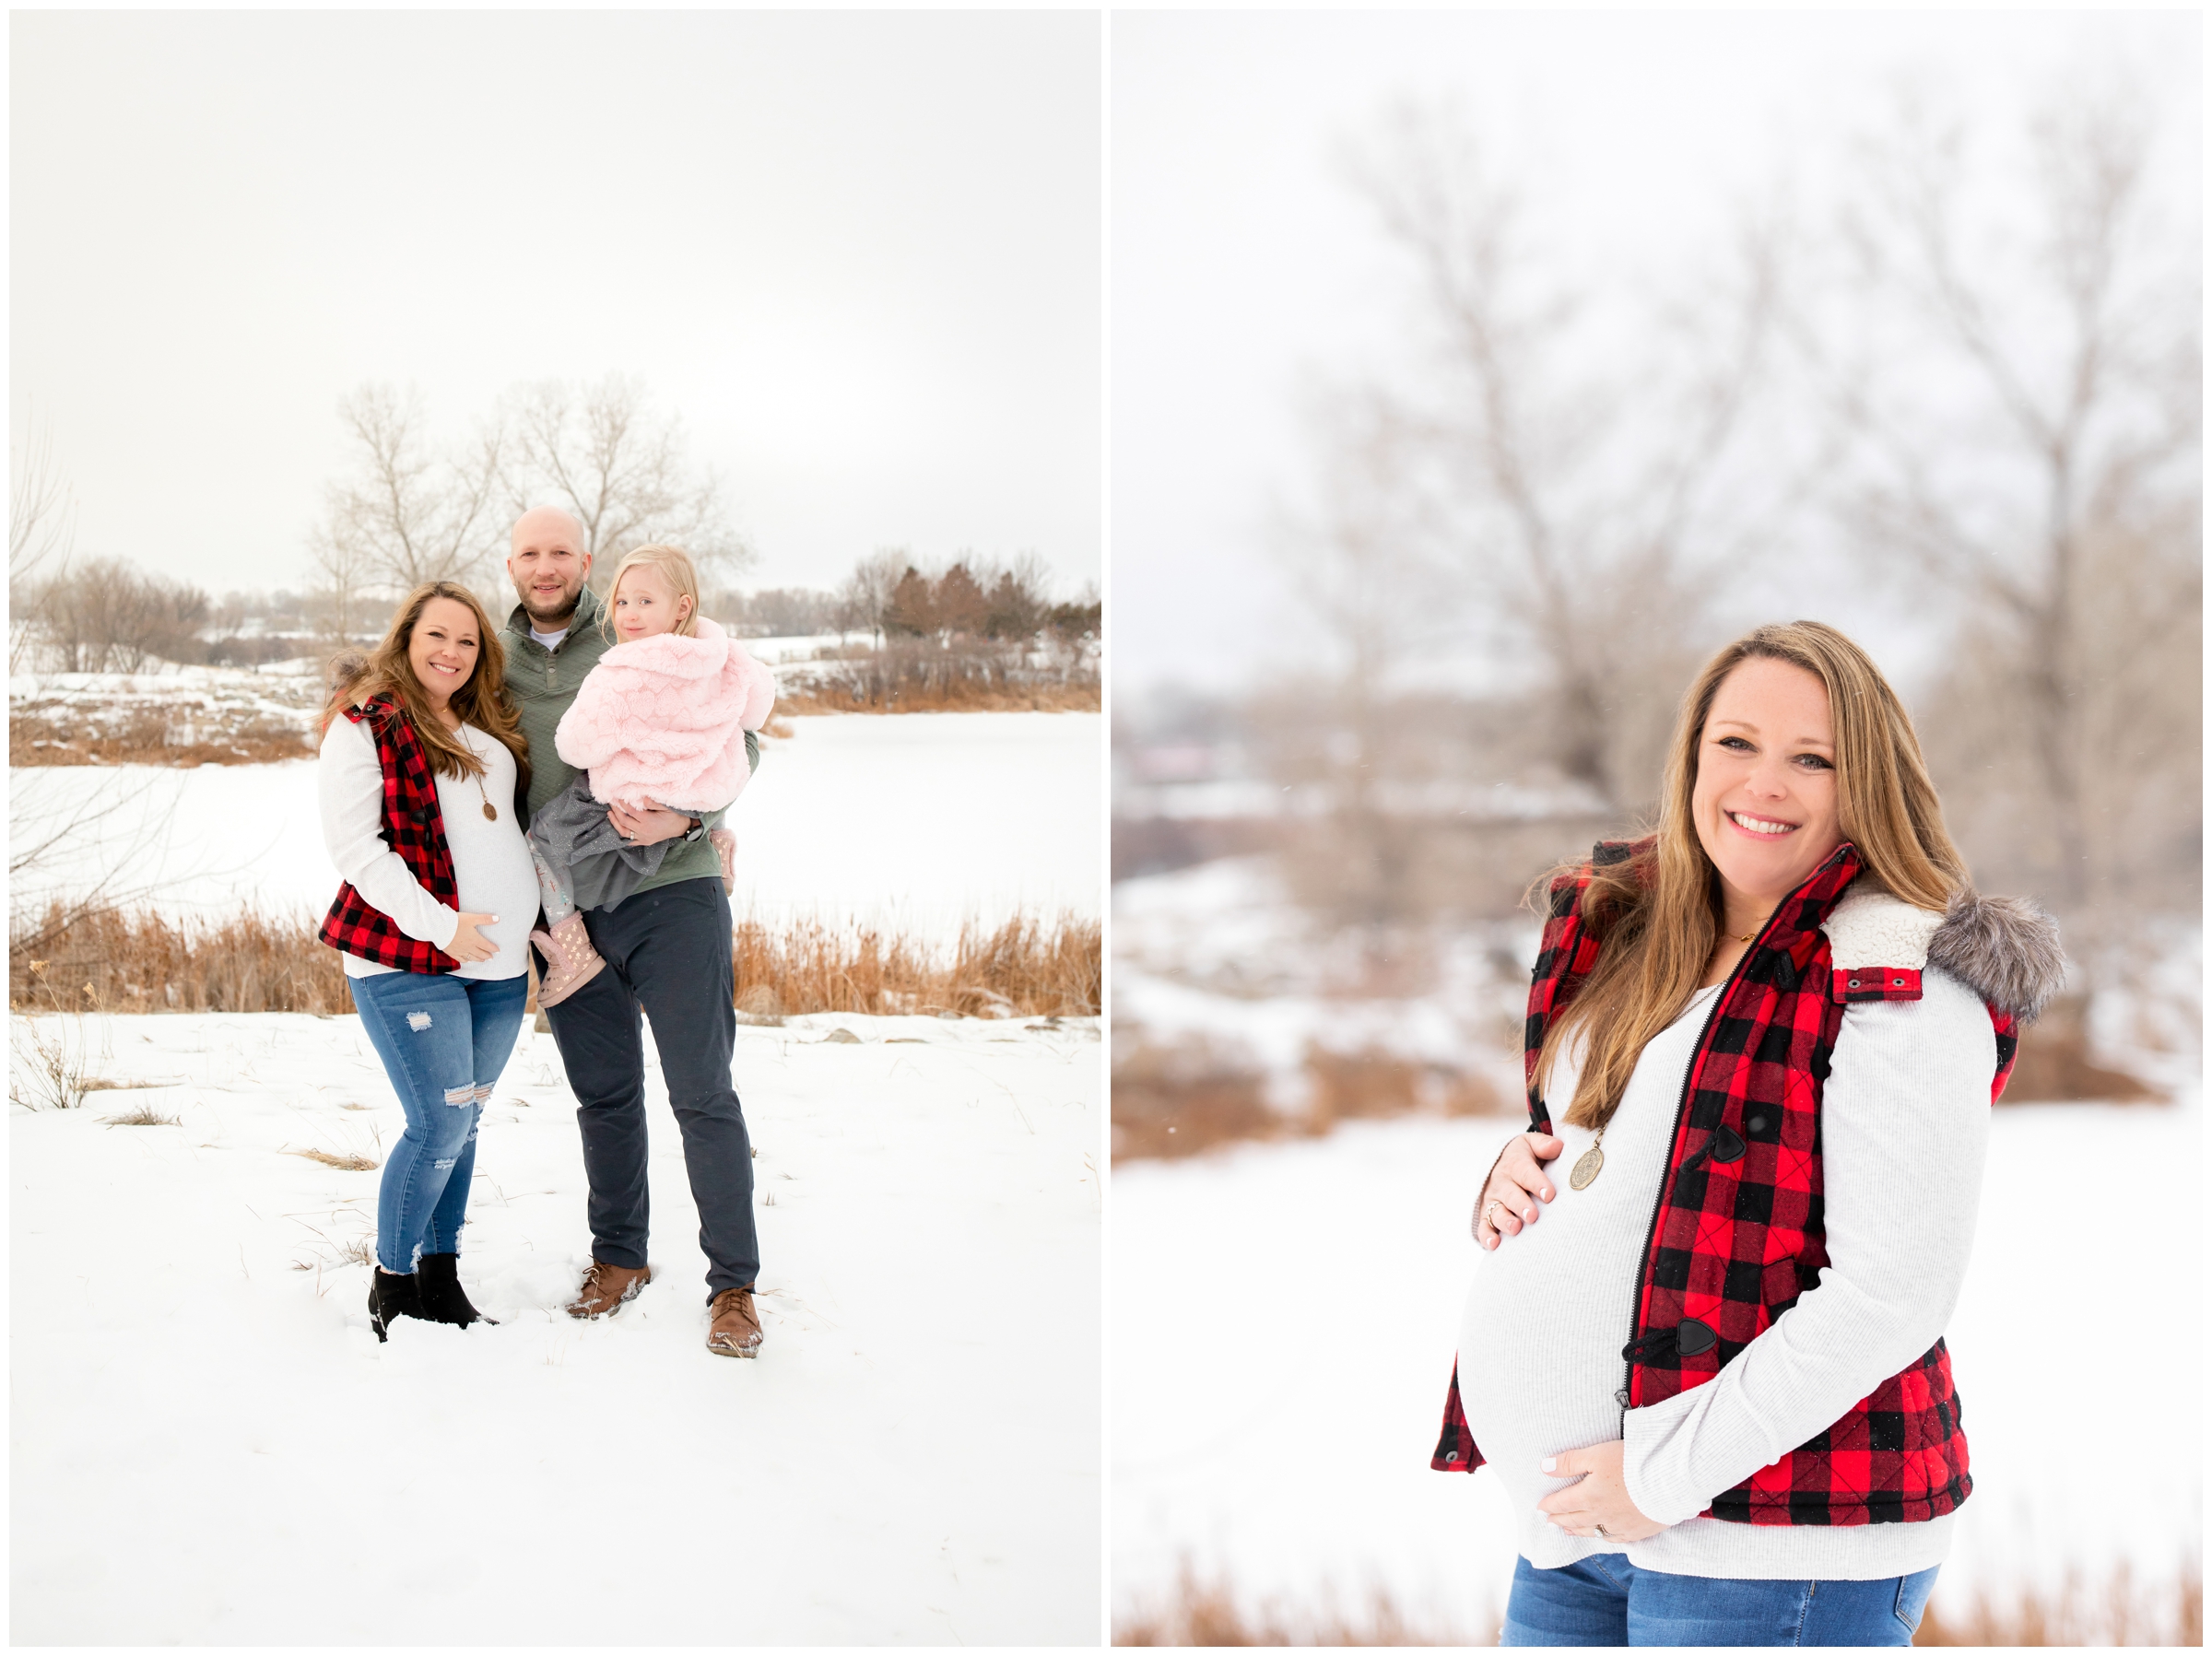 Longmont family maternity photos during winter at Sandstone Ranch by Colorado portrait photographer Plum Pretty Photography